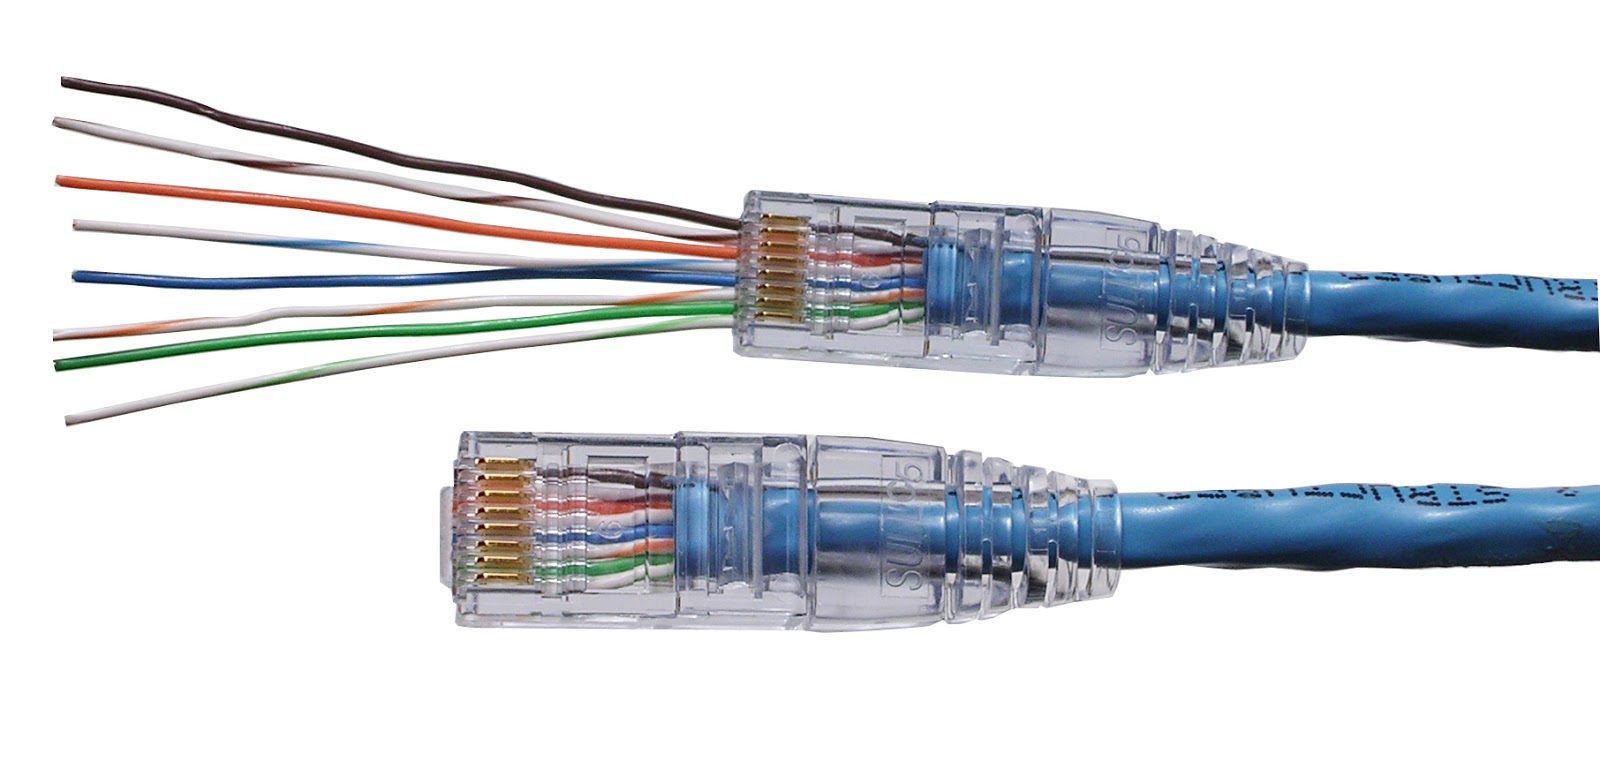 RJ45 Pinout & Wiring Diagrams for Networking | BD-FIX